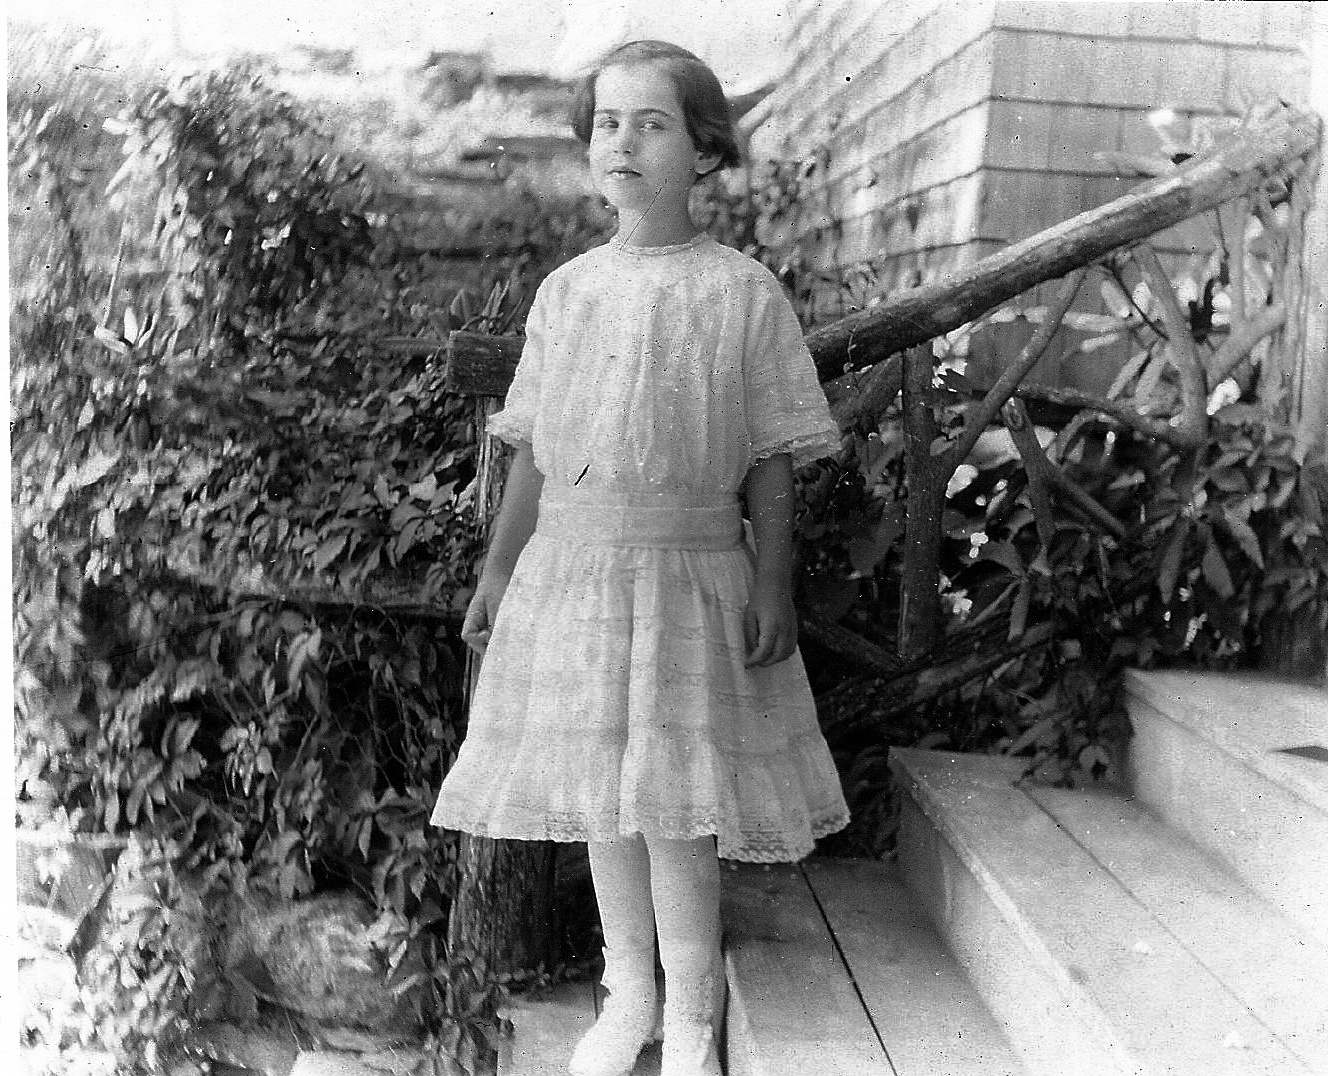 Geraldine Serby, about 6 or 7 years old